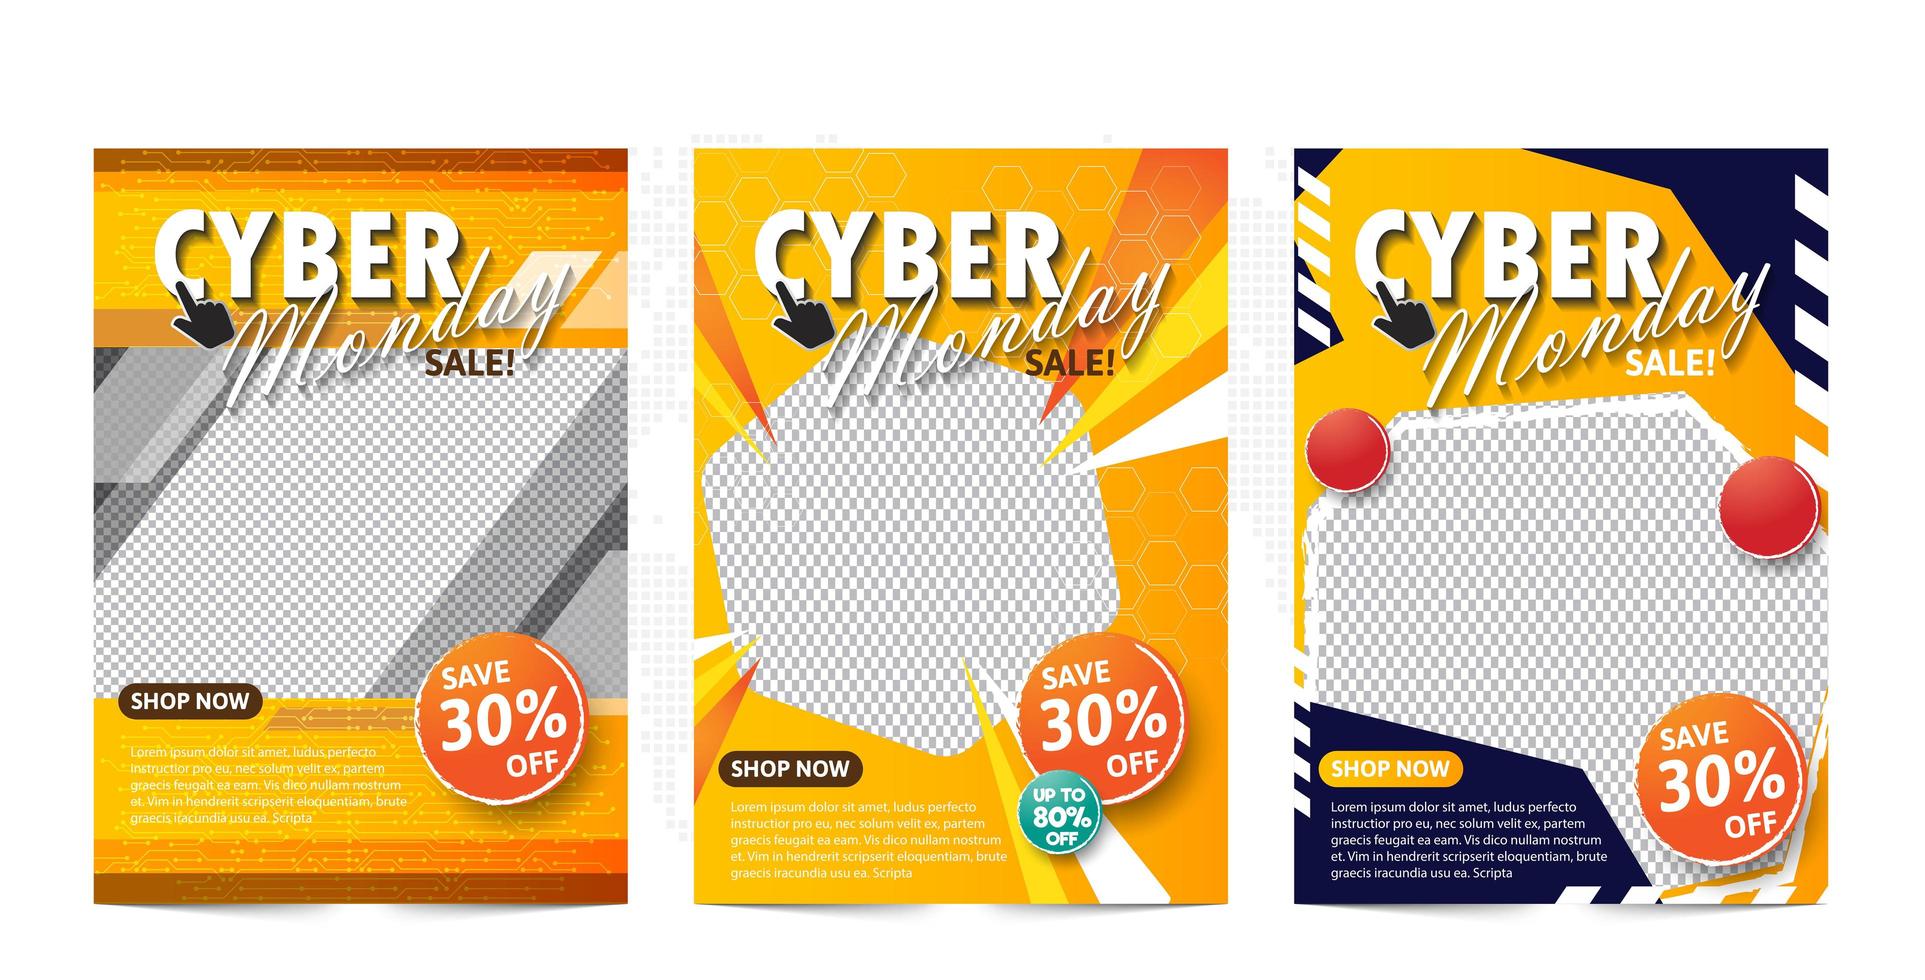 Cyber monday sale banner template with yellow theme. vector